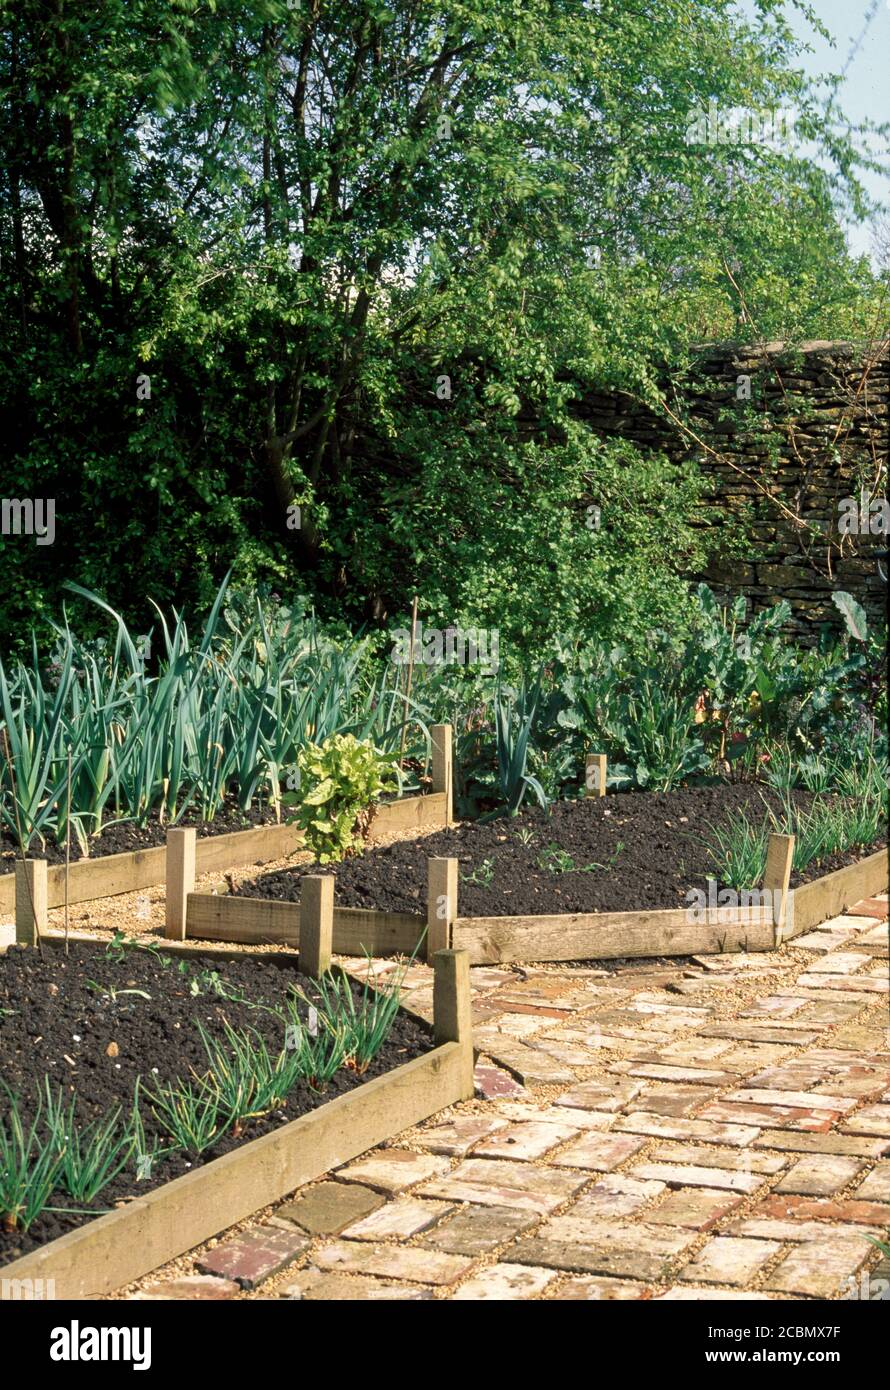 Vegetable garden with wooden raised beds and brick paving Stock Photo